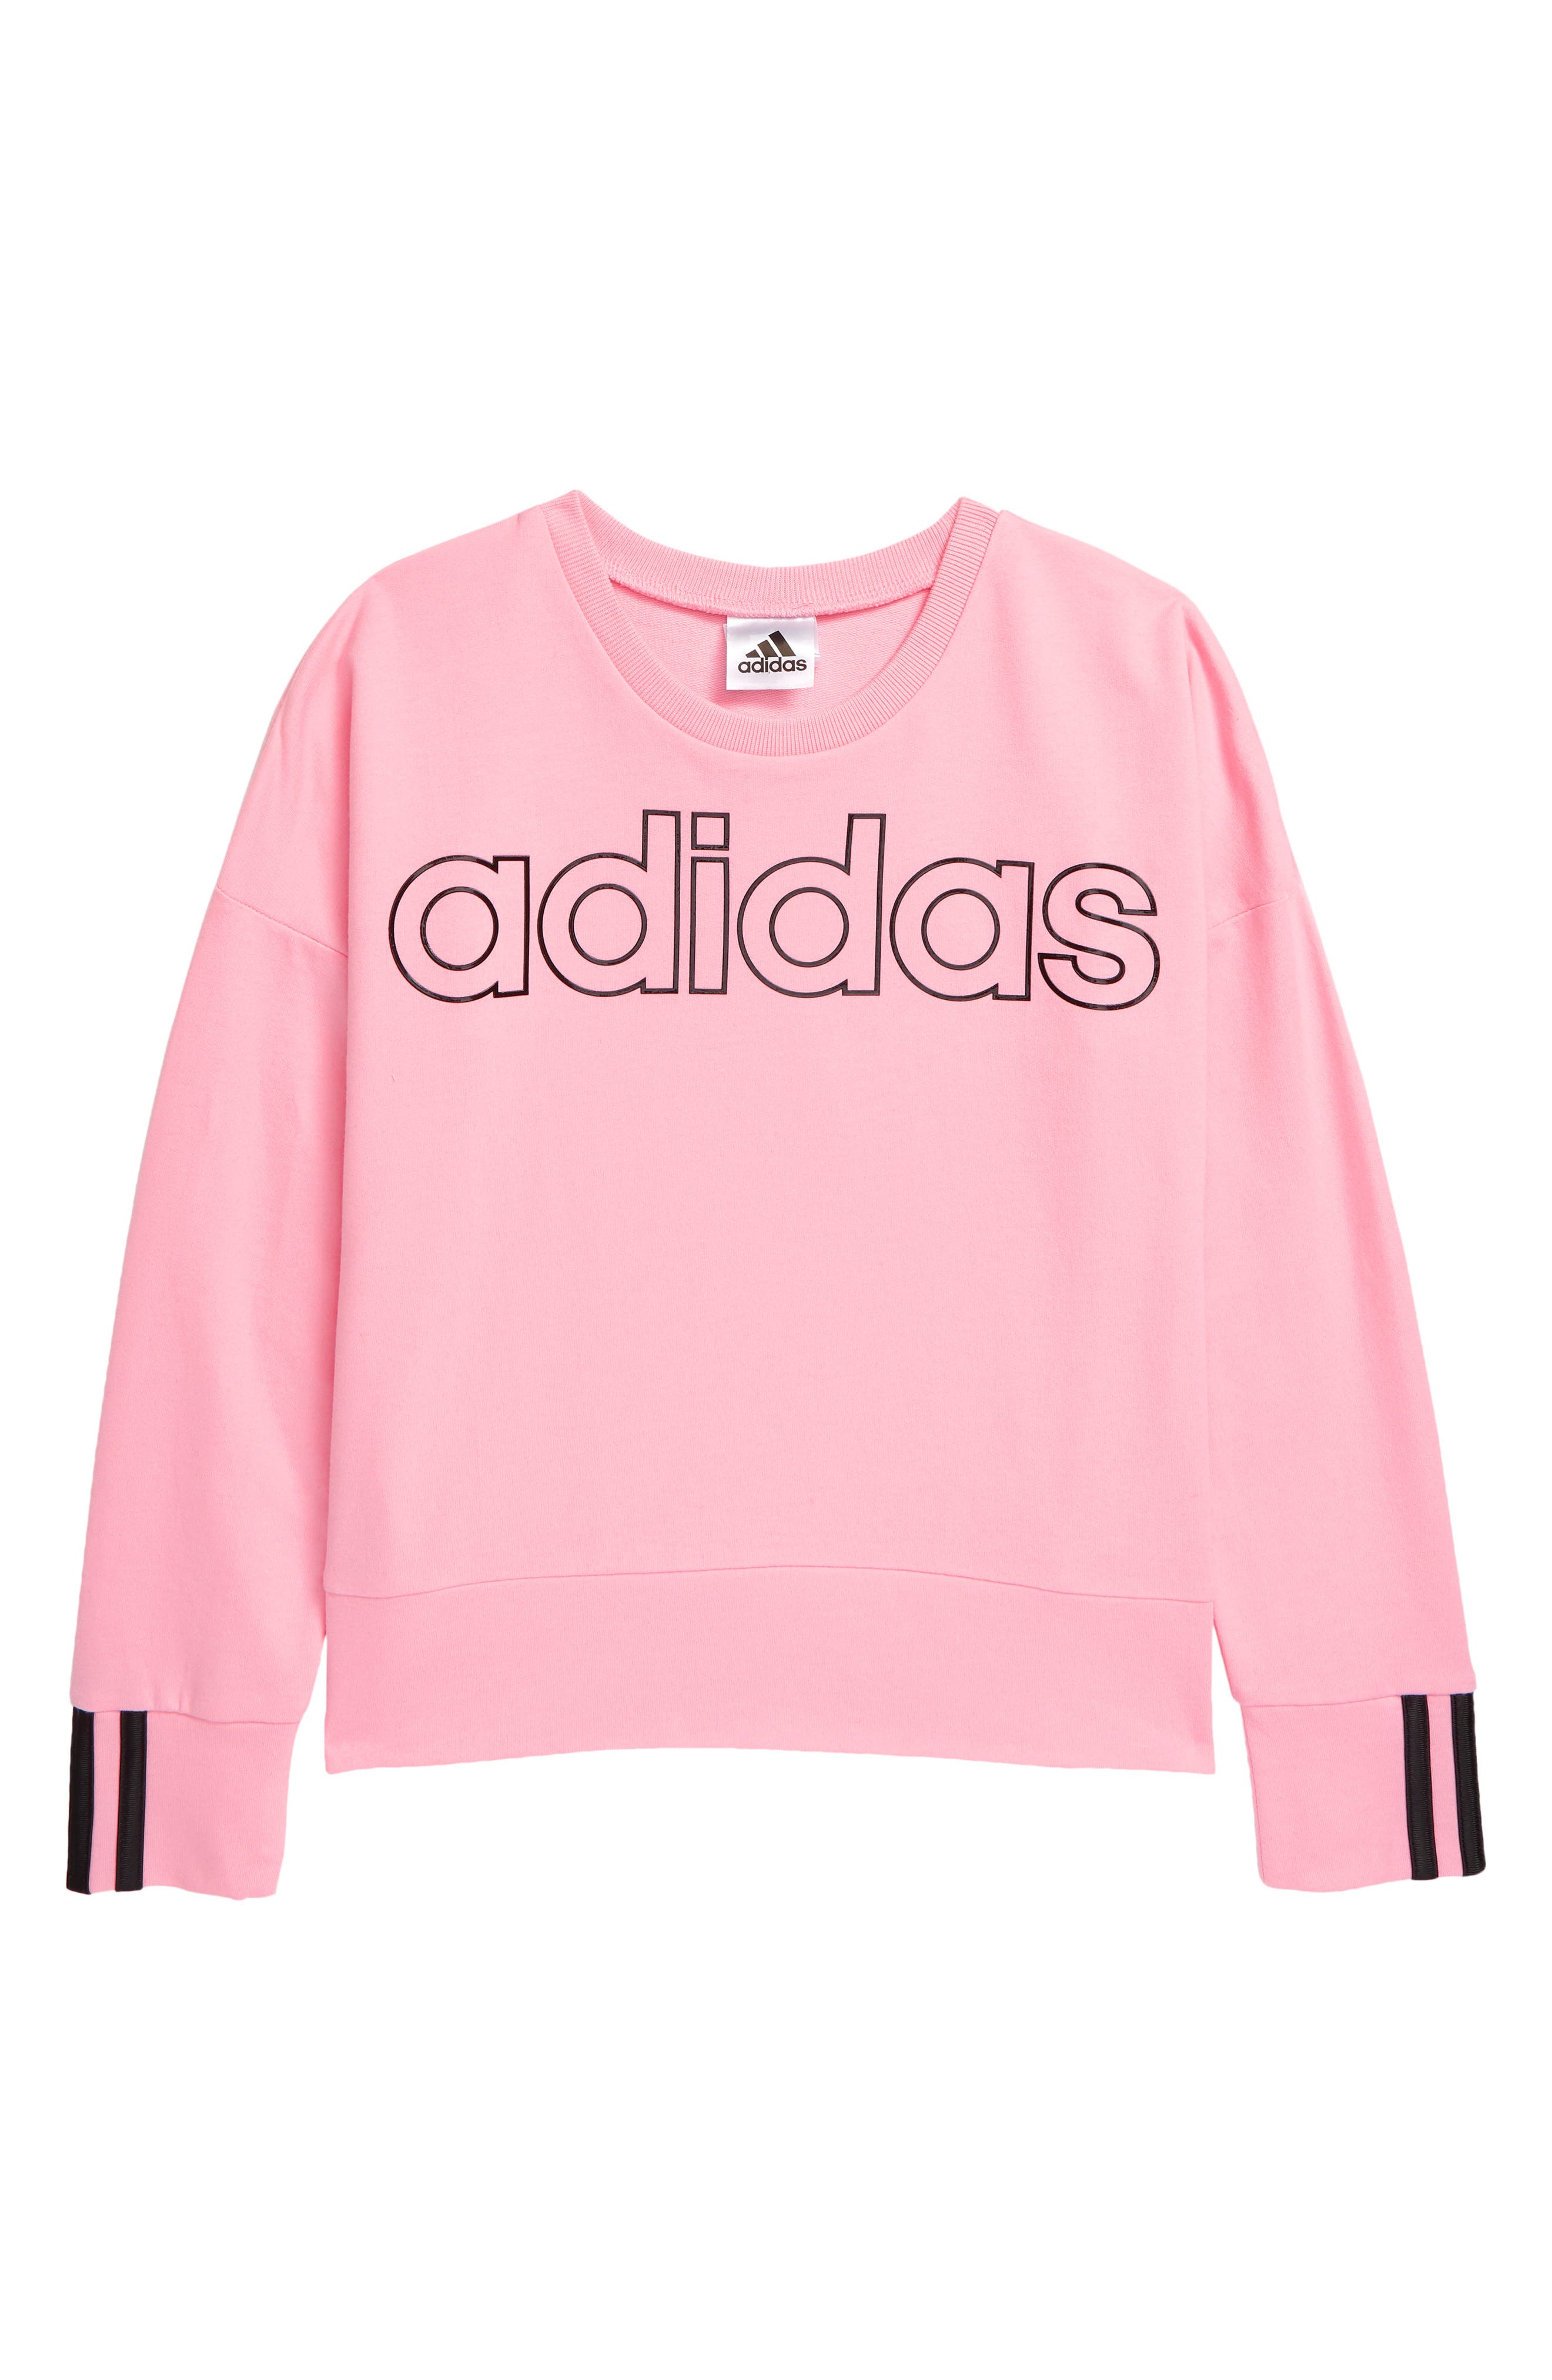 adidas clothes for kids girls